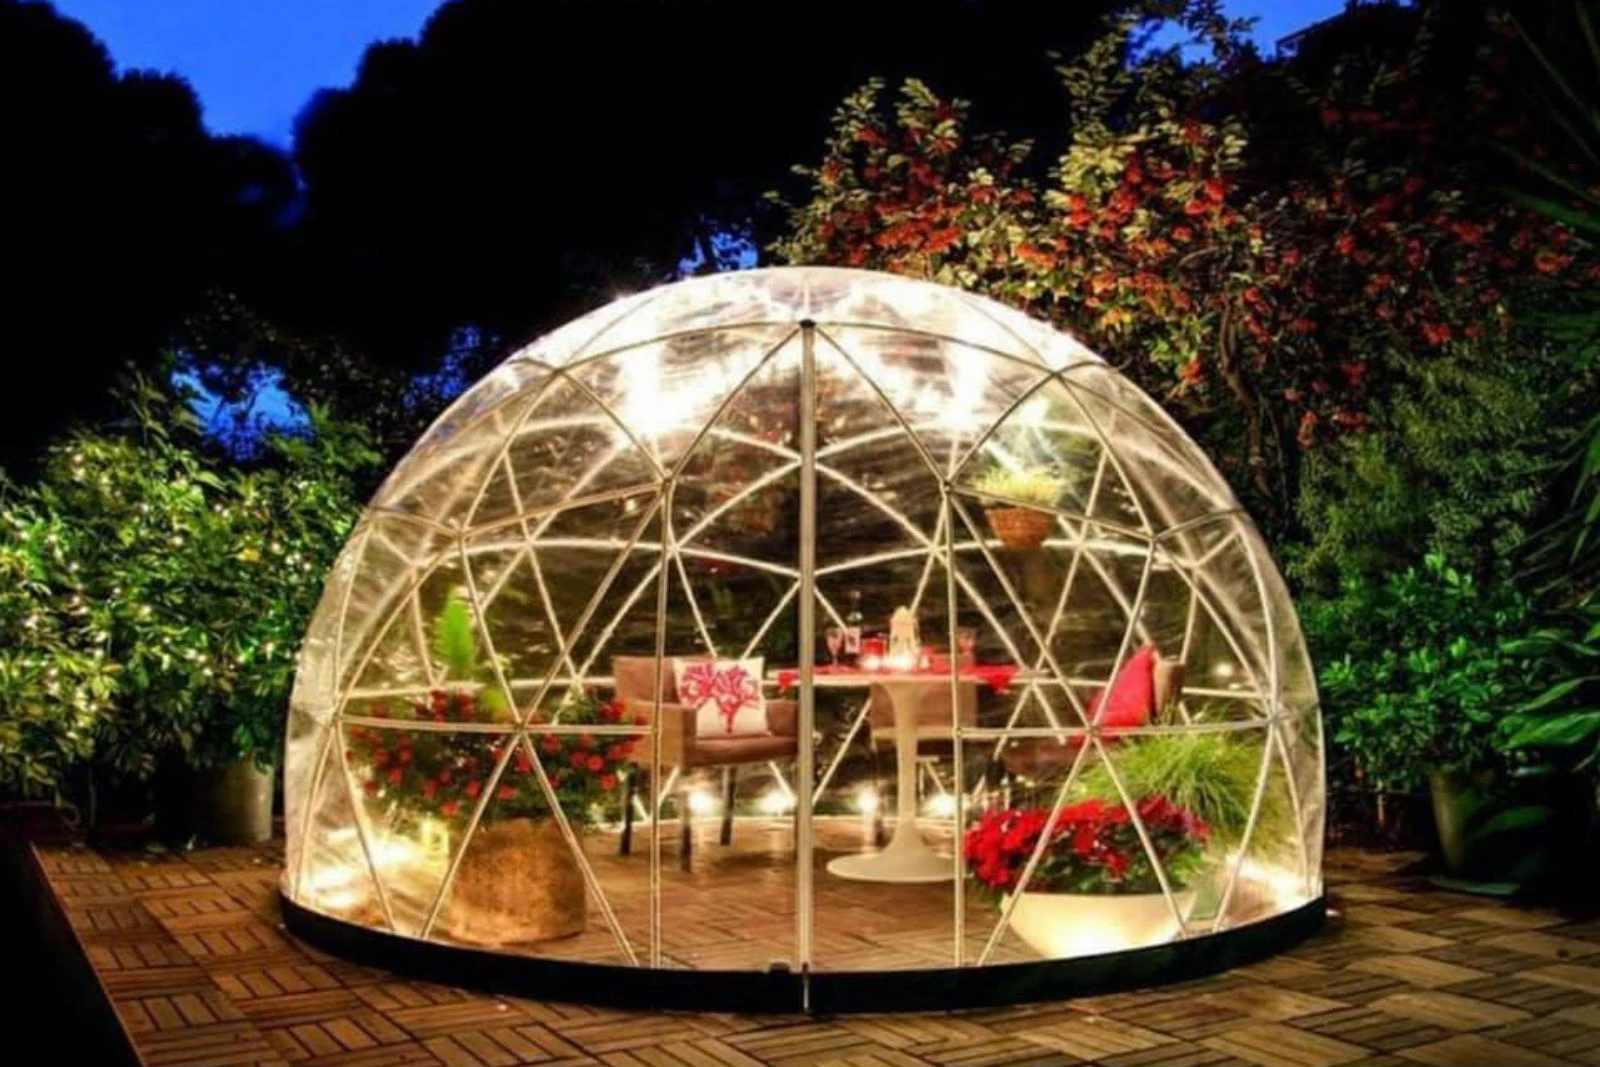 What's the deal with these dining igloos?